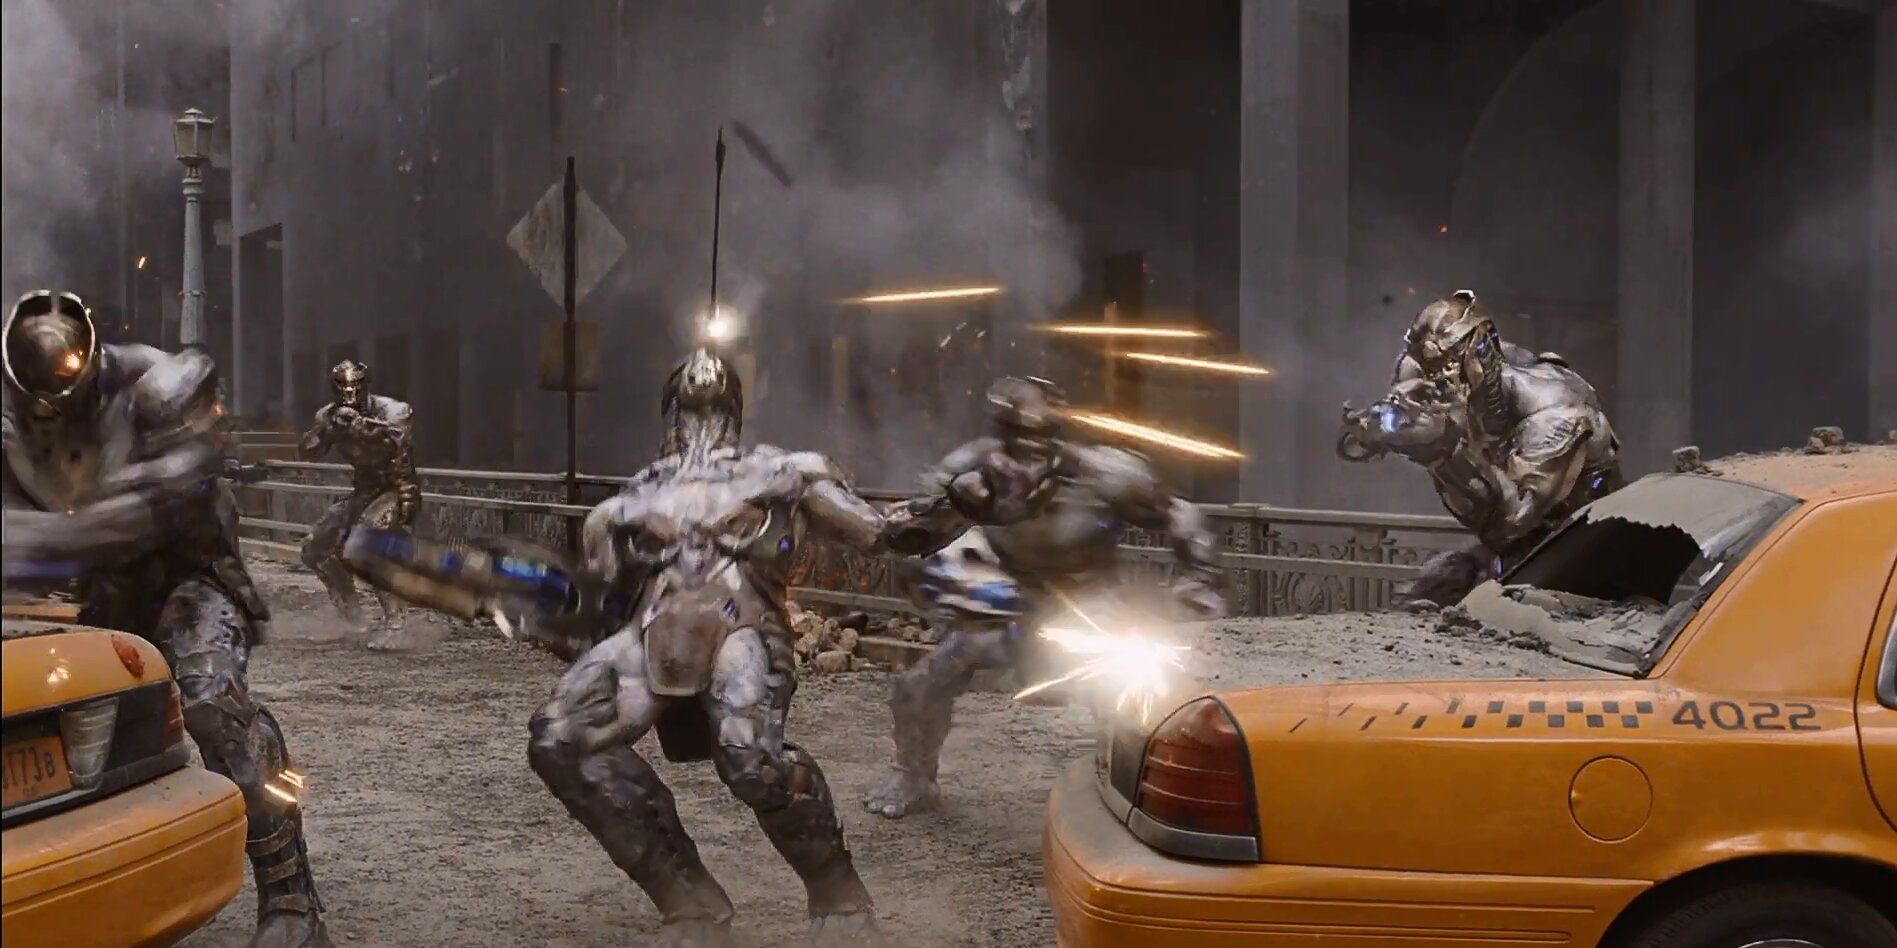 Chitauri Soldiers By Taxis Being Hit With Burst Shot Arrows From The Avengers